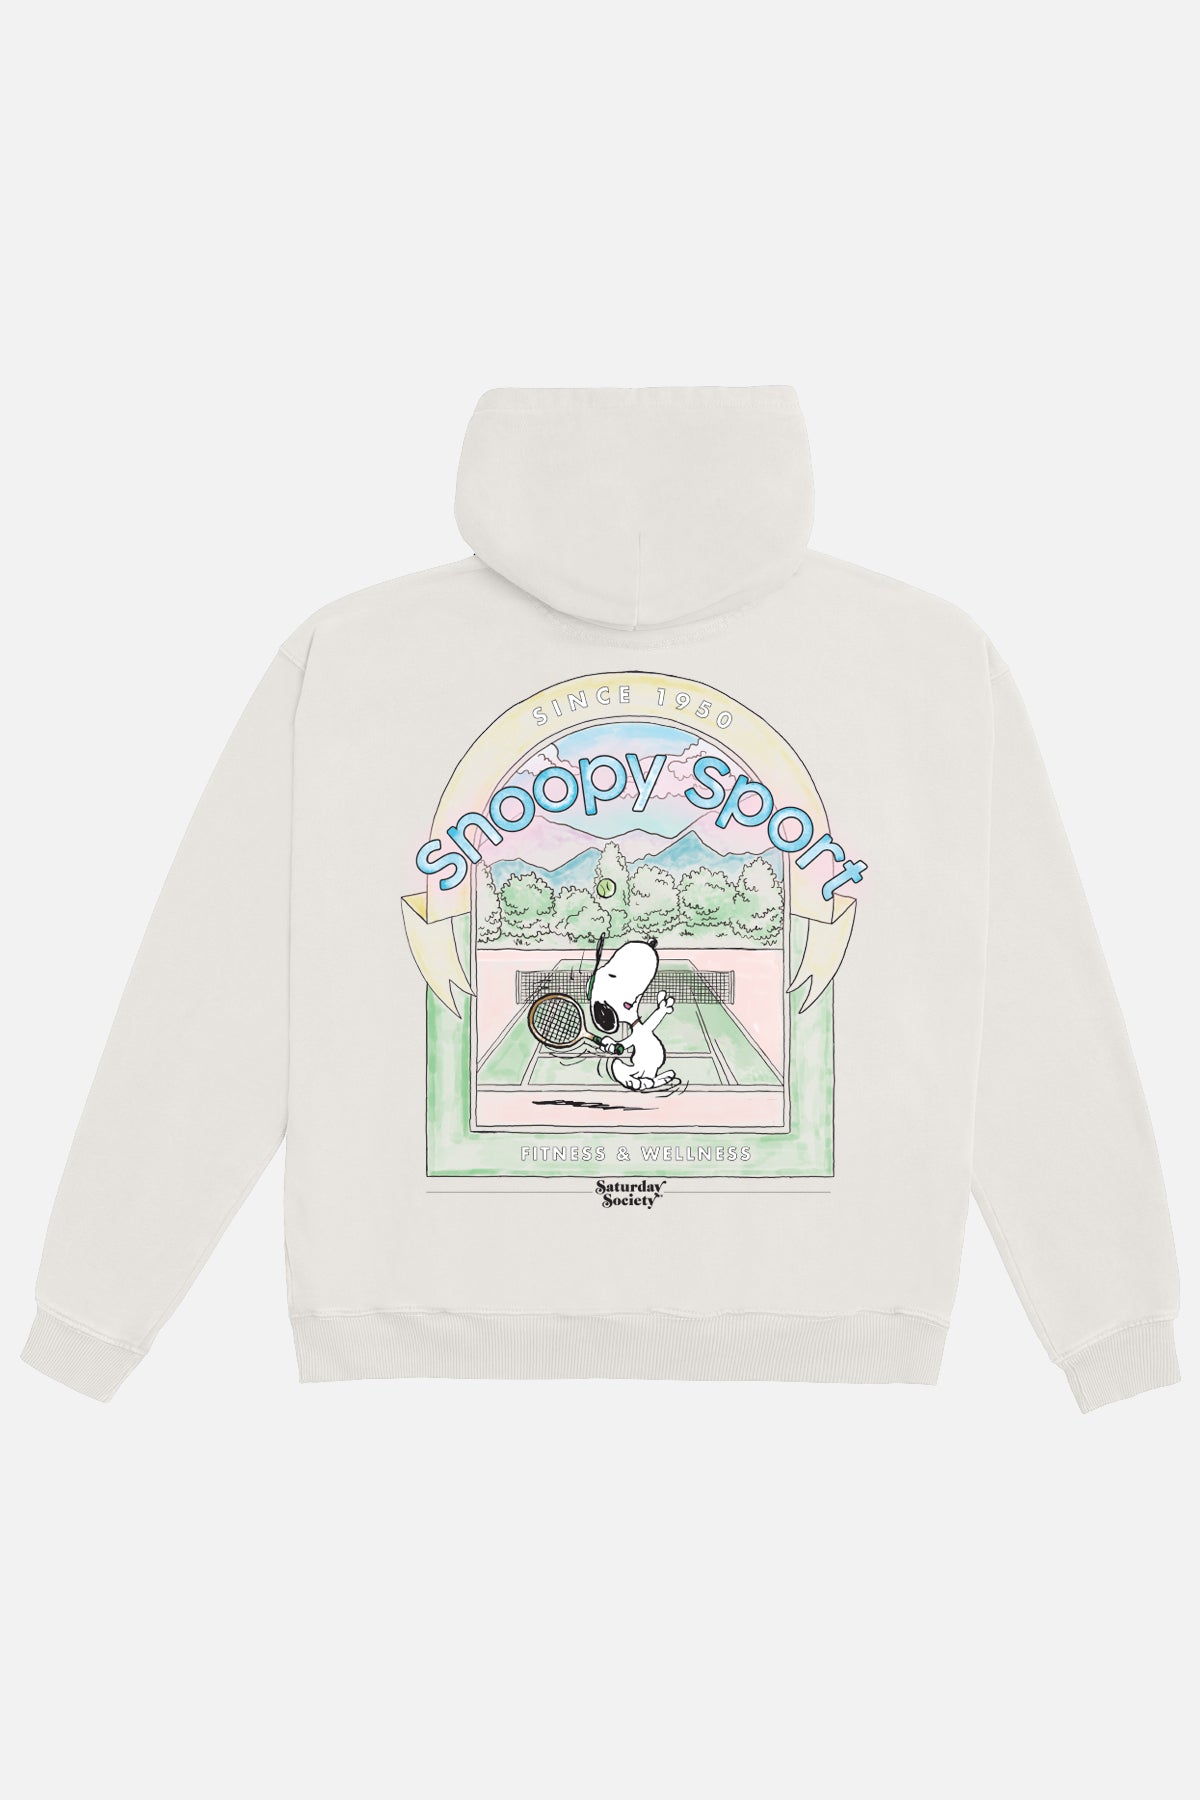 Snoopy Social Match Point Hoodie in Vintage White